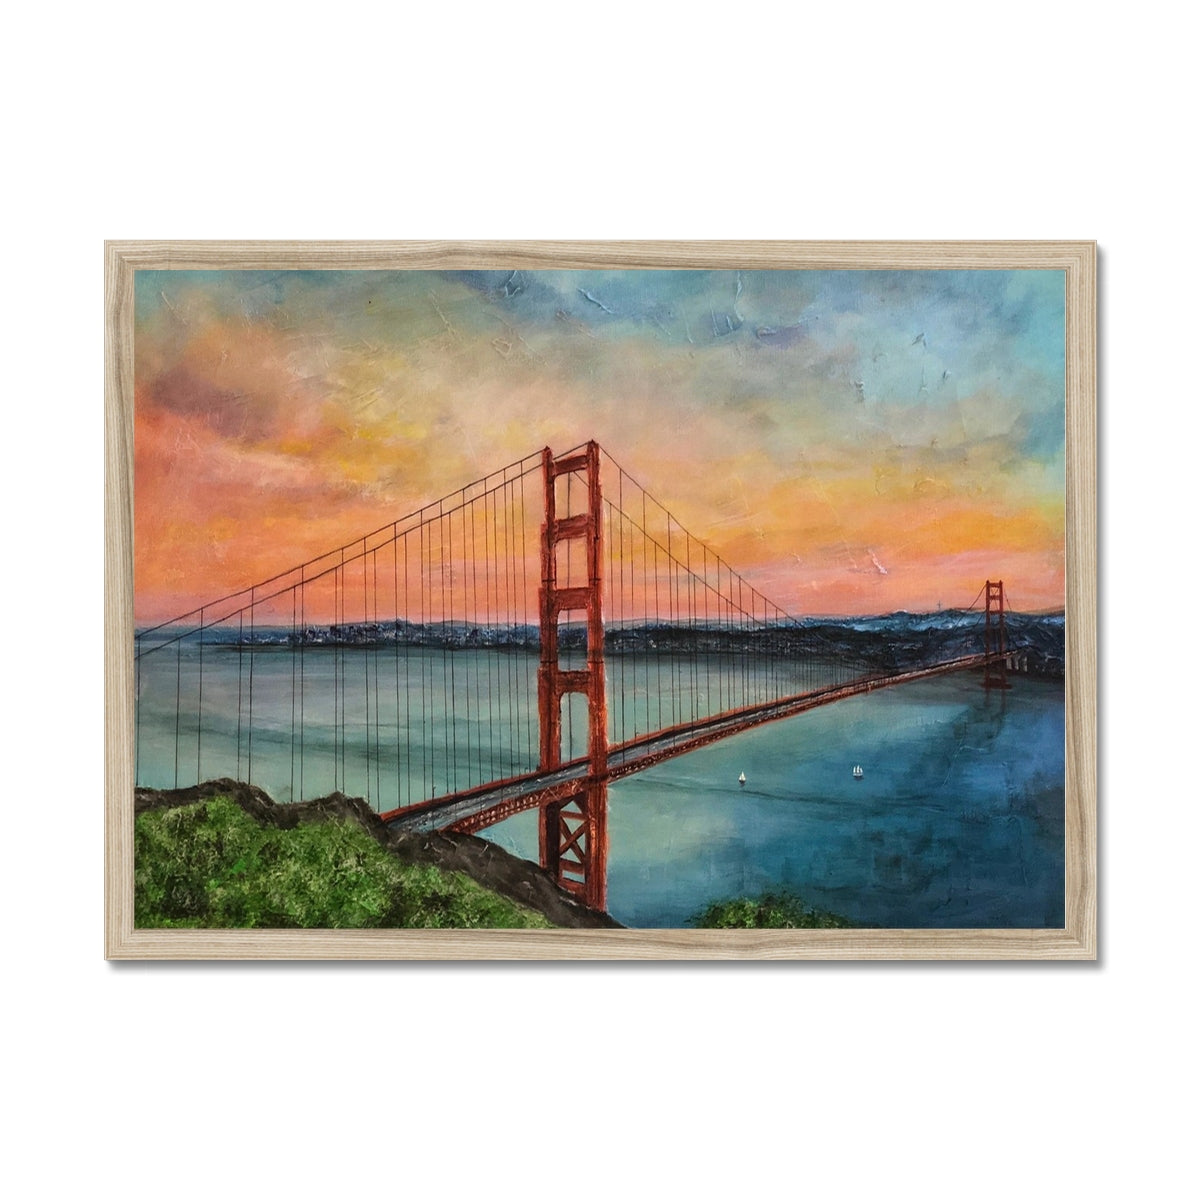 The Golden Gate Bridge Painting | Framed Prints From Scotland-Framed Prints-World Art Gallery-A2 Landscape-Natural Frame-Paintings, Prints, Homeware, Art Gifts From Scotland By Scottish Artist Kevin Hunter